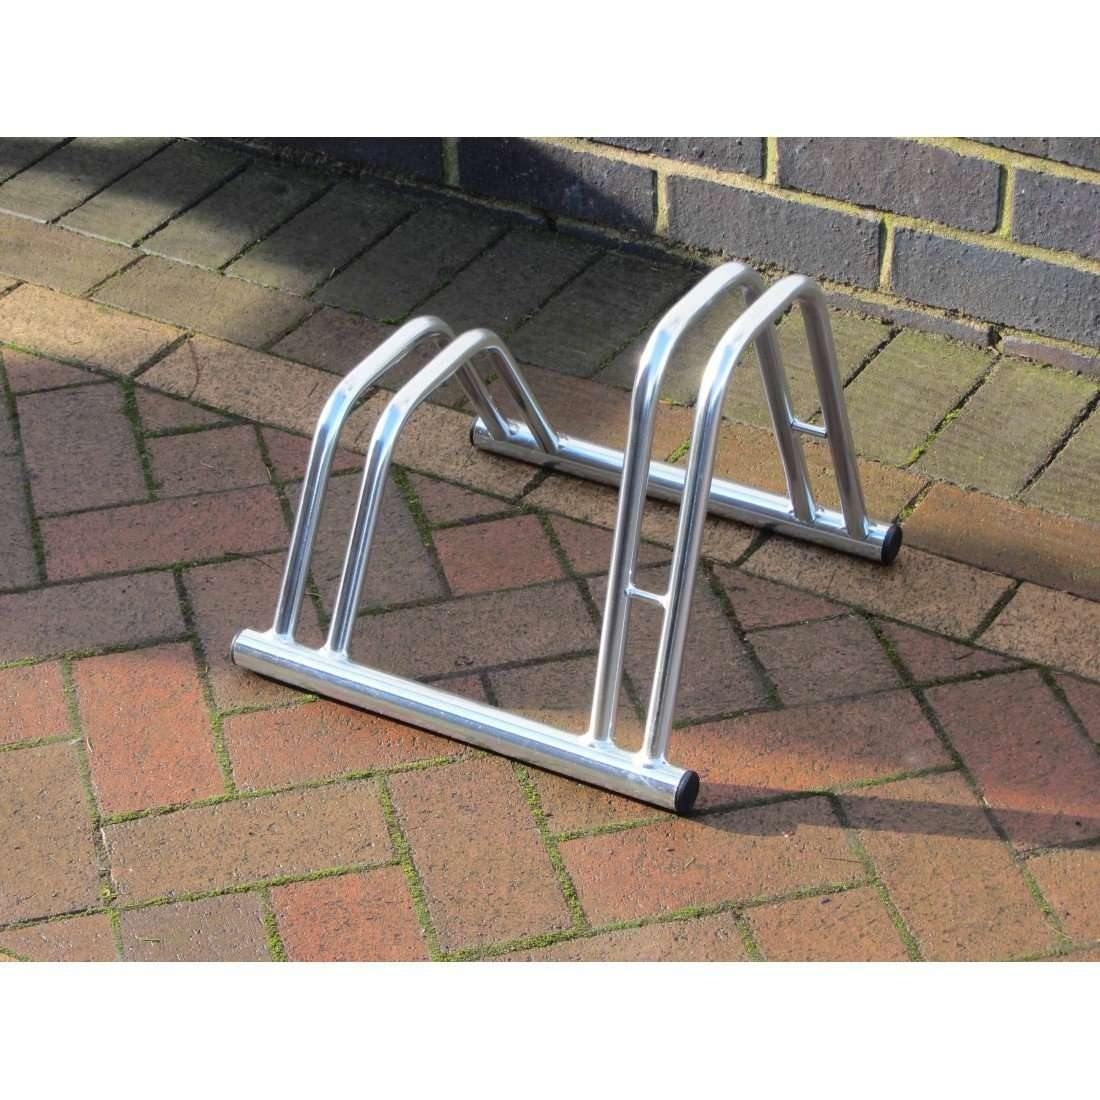 Bison Extra Wide Bike Rack (2-5 Bikes), 2-bike – Bison Products – Spearhead Outdoors